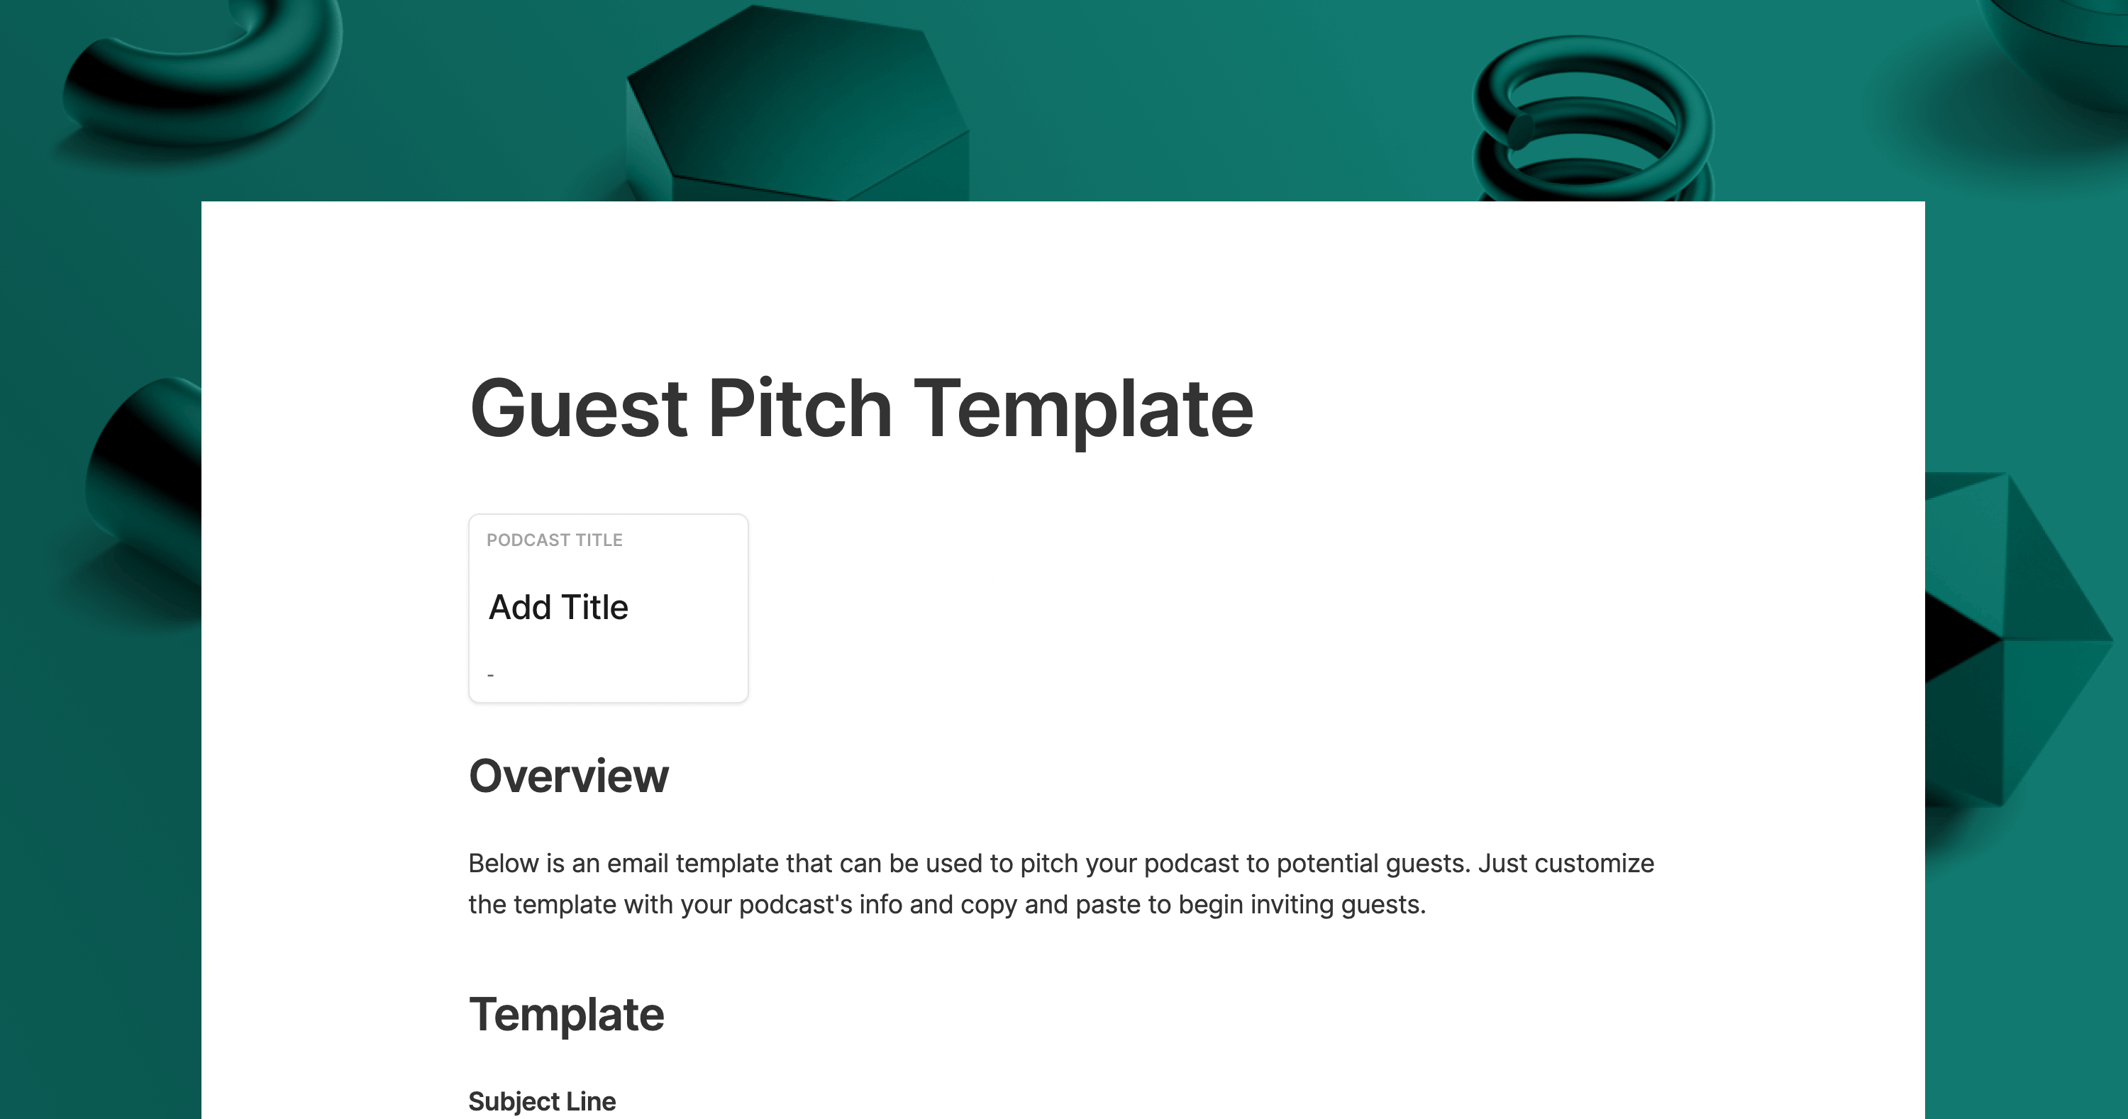 https://3389140.fs1.hubspotusercontent-na1.net/hubfs/3389140/guest%20pitch%20template%20cover.png